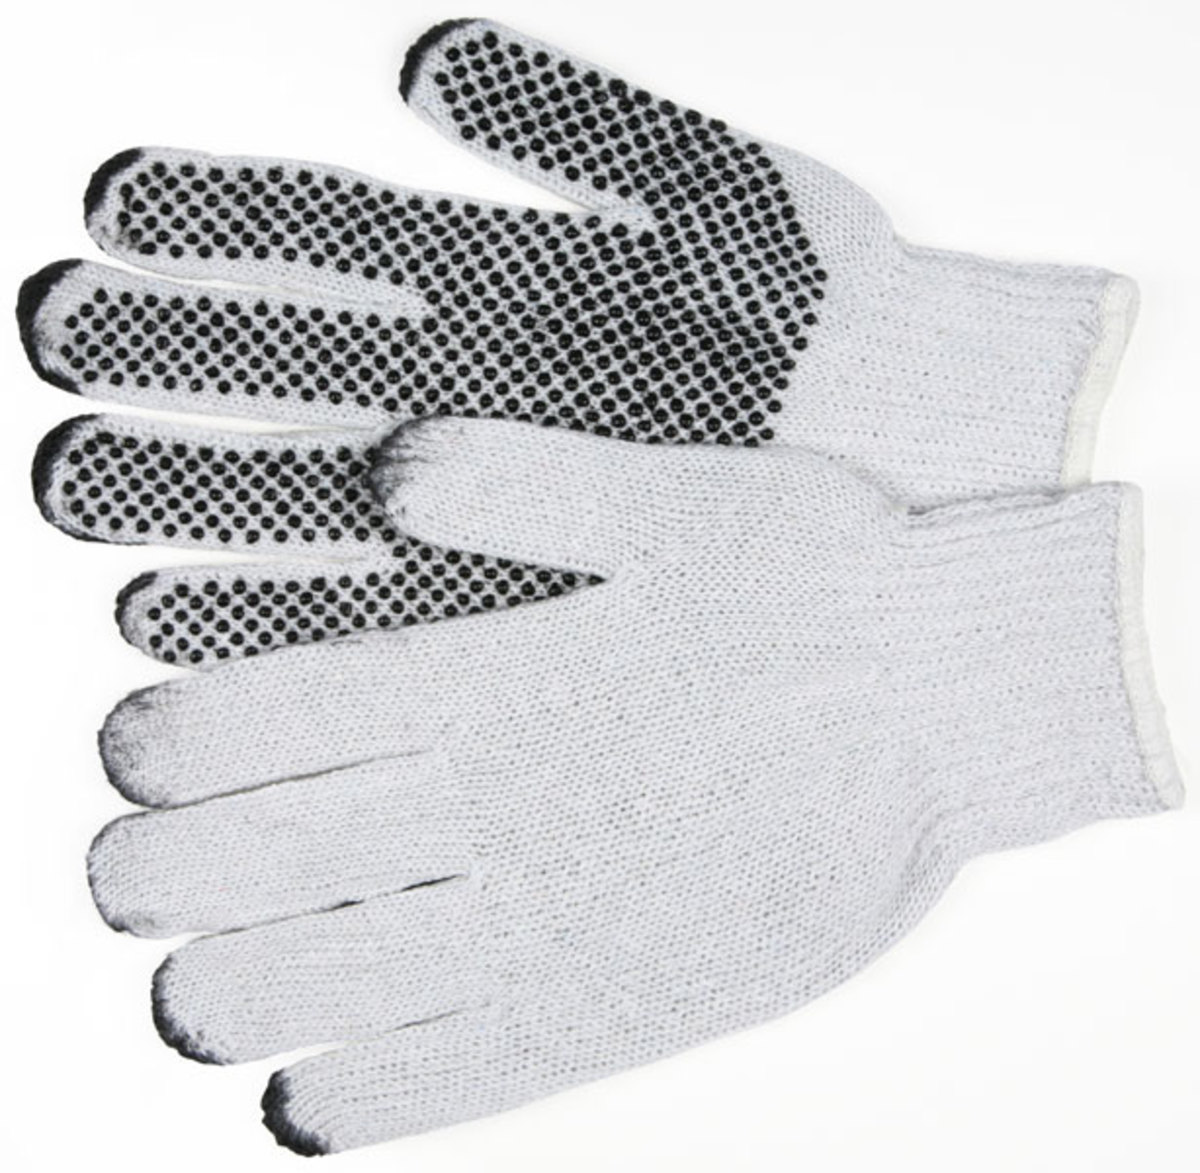 Memphis Glove Large White And Black 7 Gauge Cotton And Polyester String Knit Work Gloves With Knit Wrist